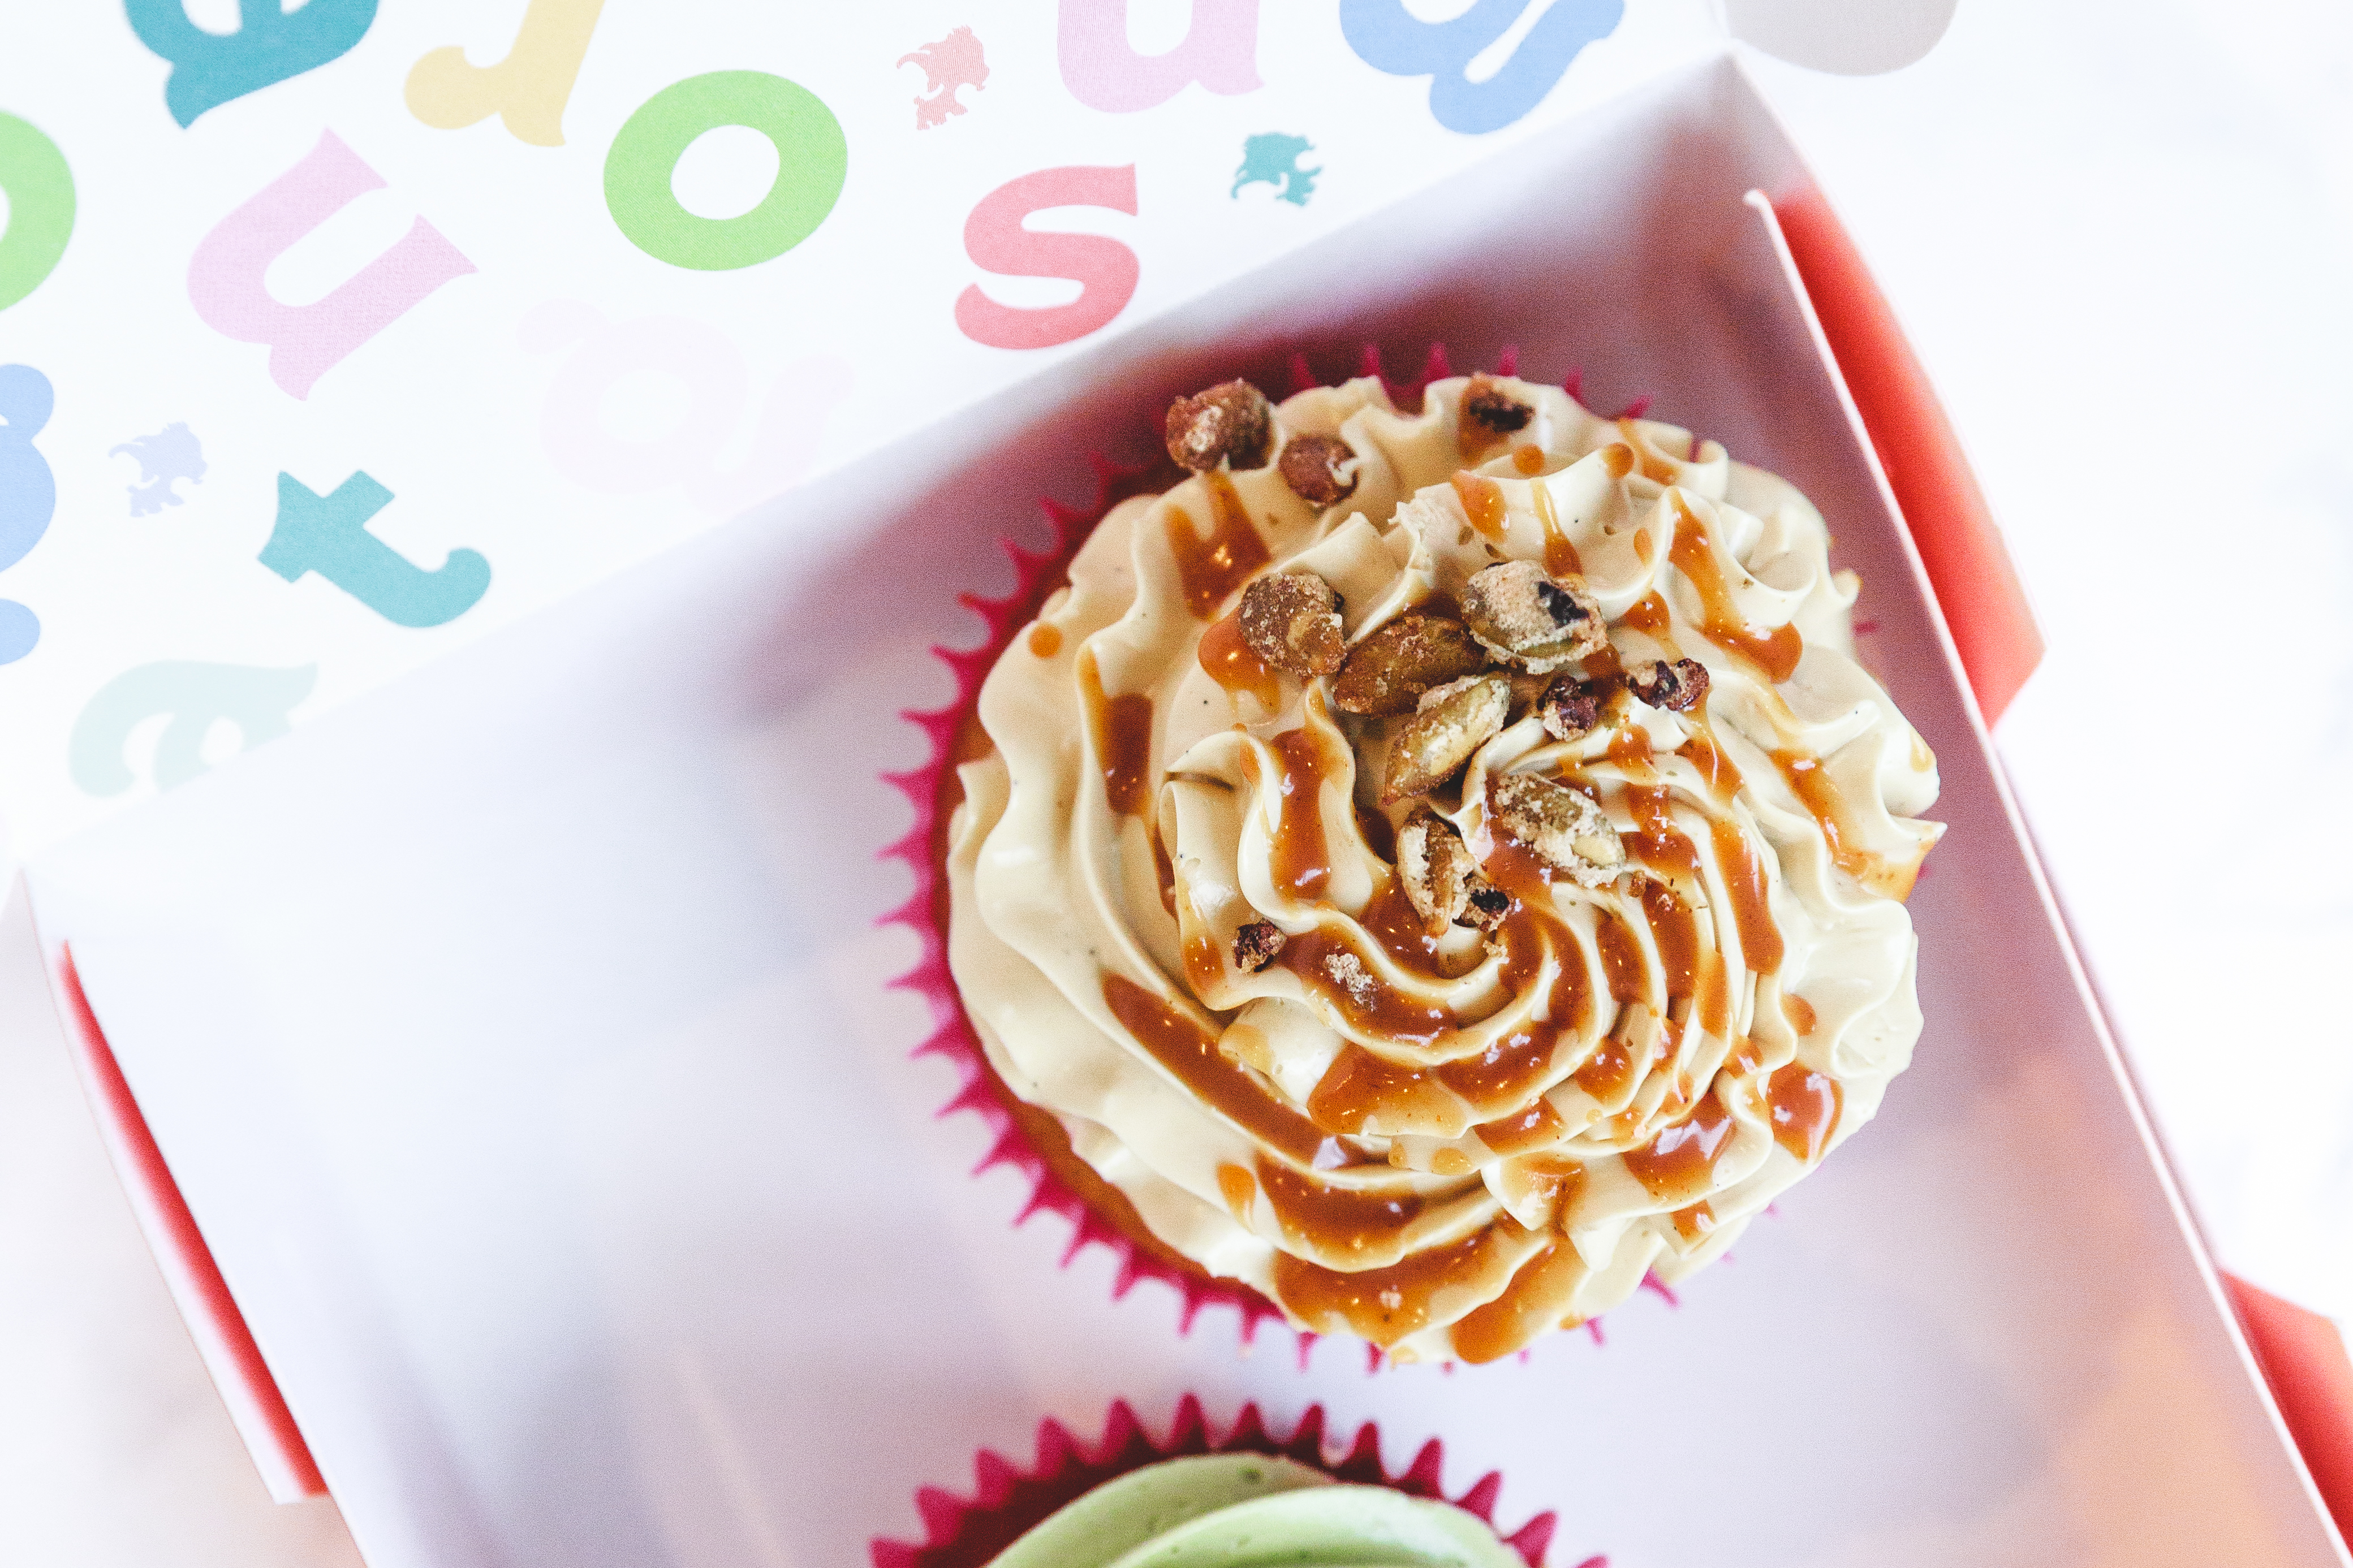 A cupcake topped with frosting and sauce inside a box.